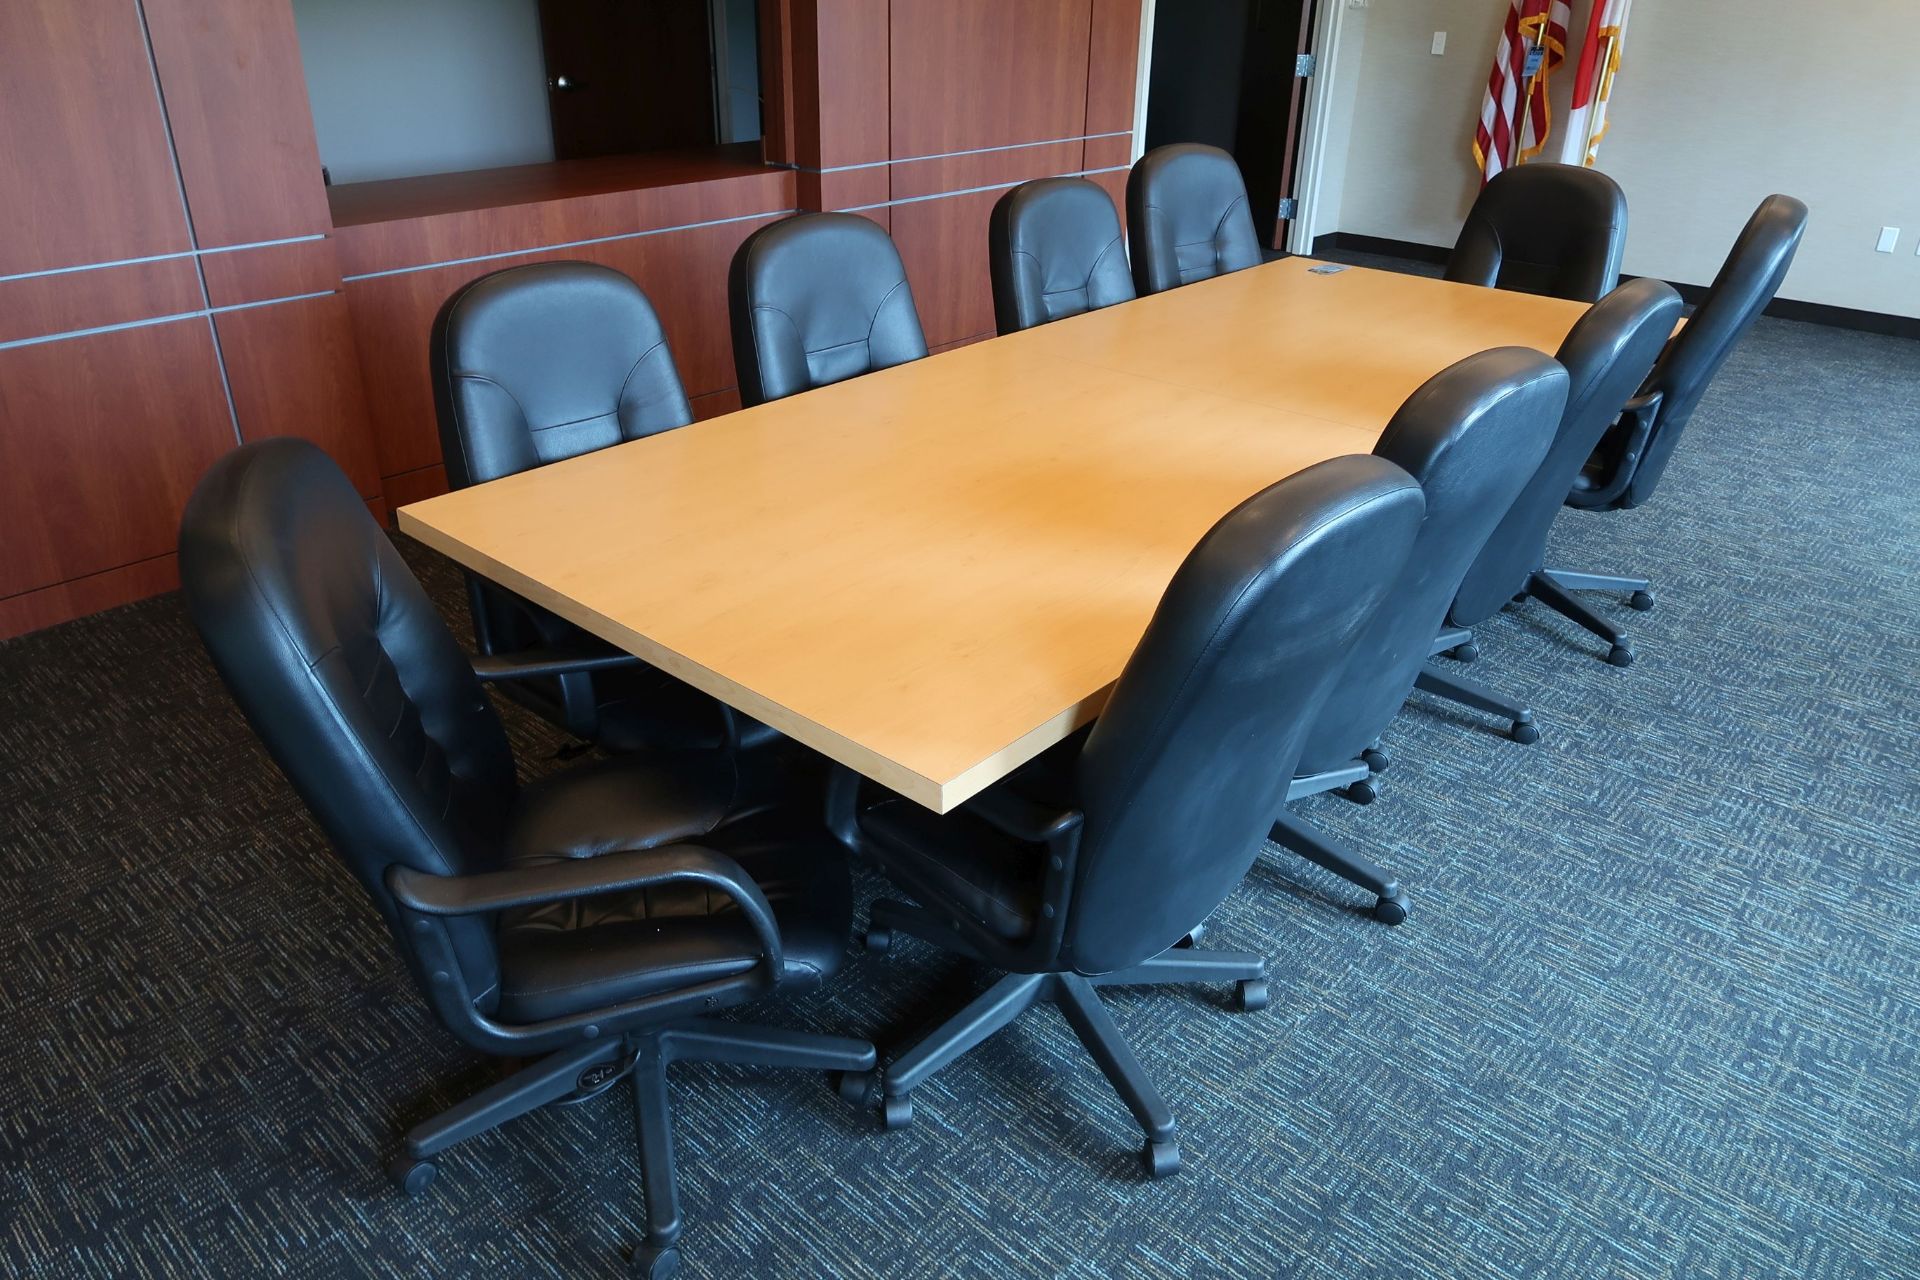 (LOT) 4' X 10' CONFERENCE TABLE, (10) BLACK CHAIRS, (14) BLUE STACK CHAIRS - Image 2 of 3